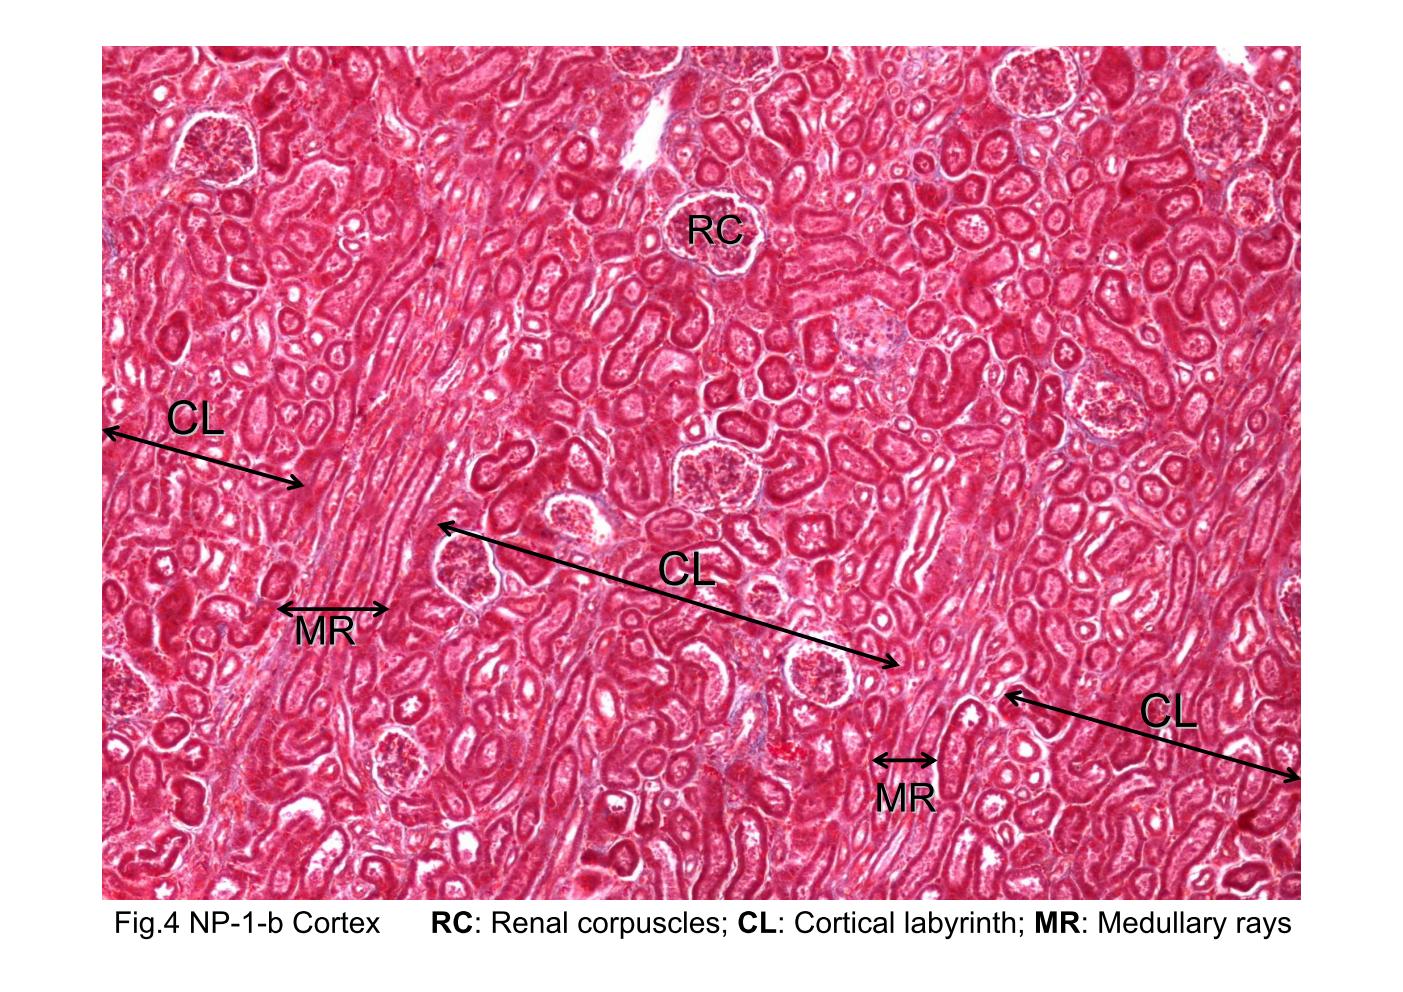 block8_08.jpg - Fig 4. The microscopic structure of renal cortex. The renalcortex can be divided into regions referred to the corticallabyrinth (CL) and the medullary rays (MR). The corticallabyrinth contains the renal corpuscles (RC). Surrounding eachrenal corpuscle are the proximal and distal convoluted tubules,which are also part of the cortical labyrinth. The medullary raysare composed of groups of straight tubules oriented in thesame direction and appear to radiate from the medulla. Whenthe medullary rays are cut longitudinally, as they are in thisfigure, the tubules present elongated profiles. The medullaryrays contain proximal thick segments (descending limb ofHenle's loop), distal thick segments (ascending limbs of Henle'sloop), and collecting tubules. But they can¡¦t be identified well inthis slide.